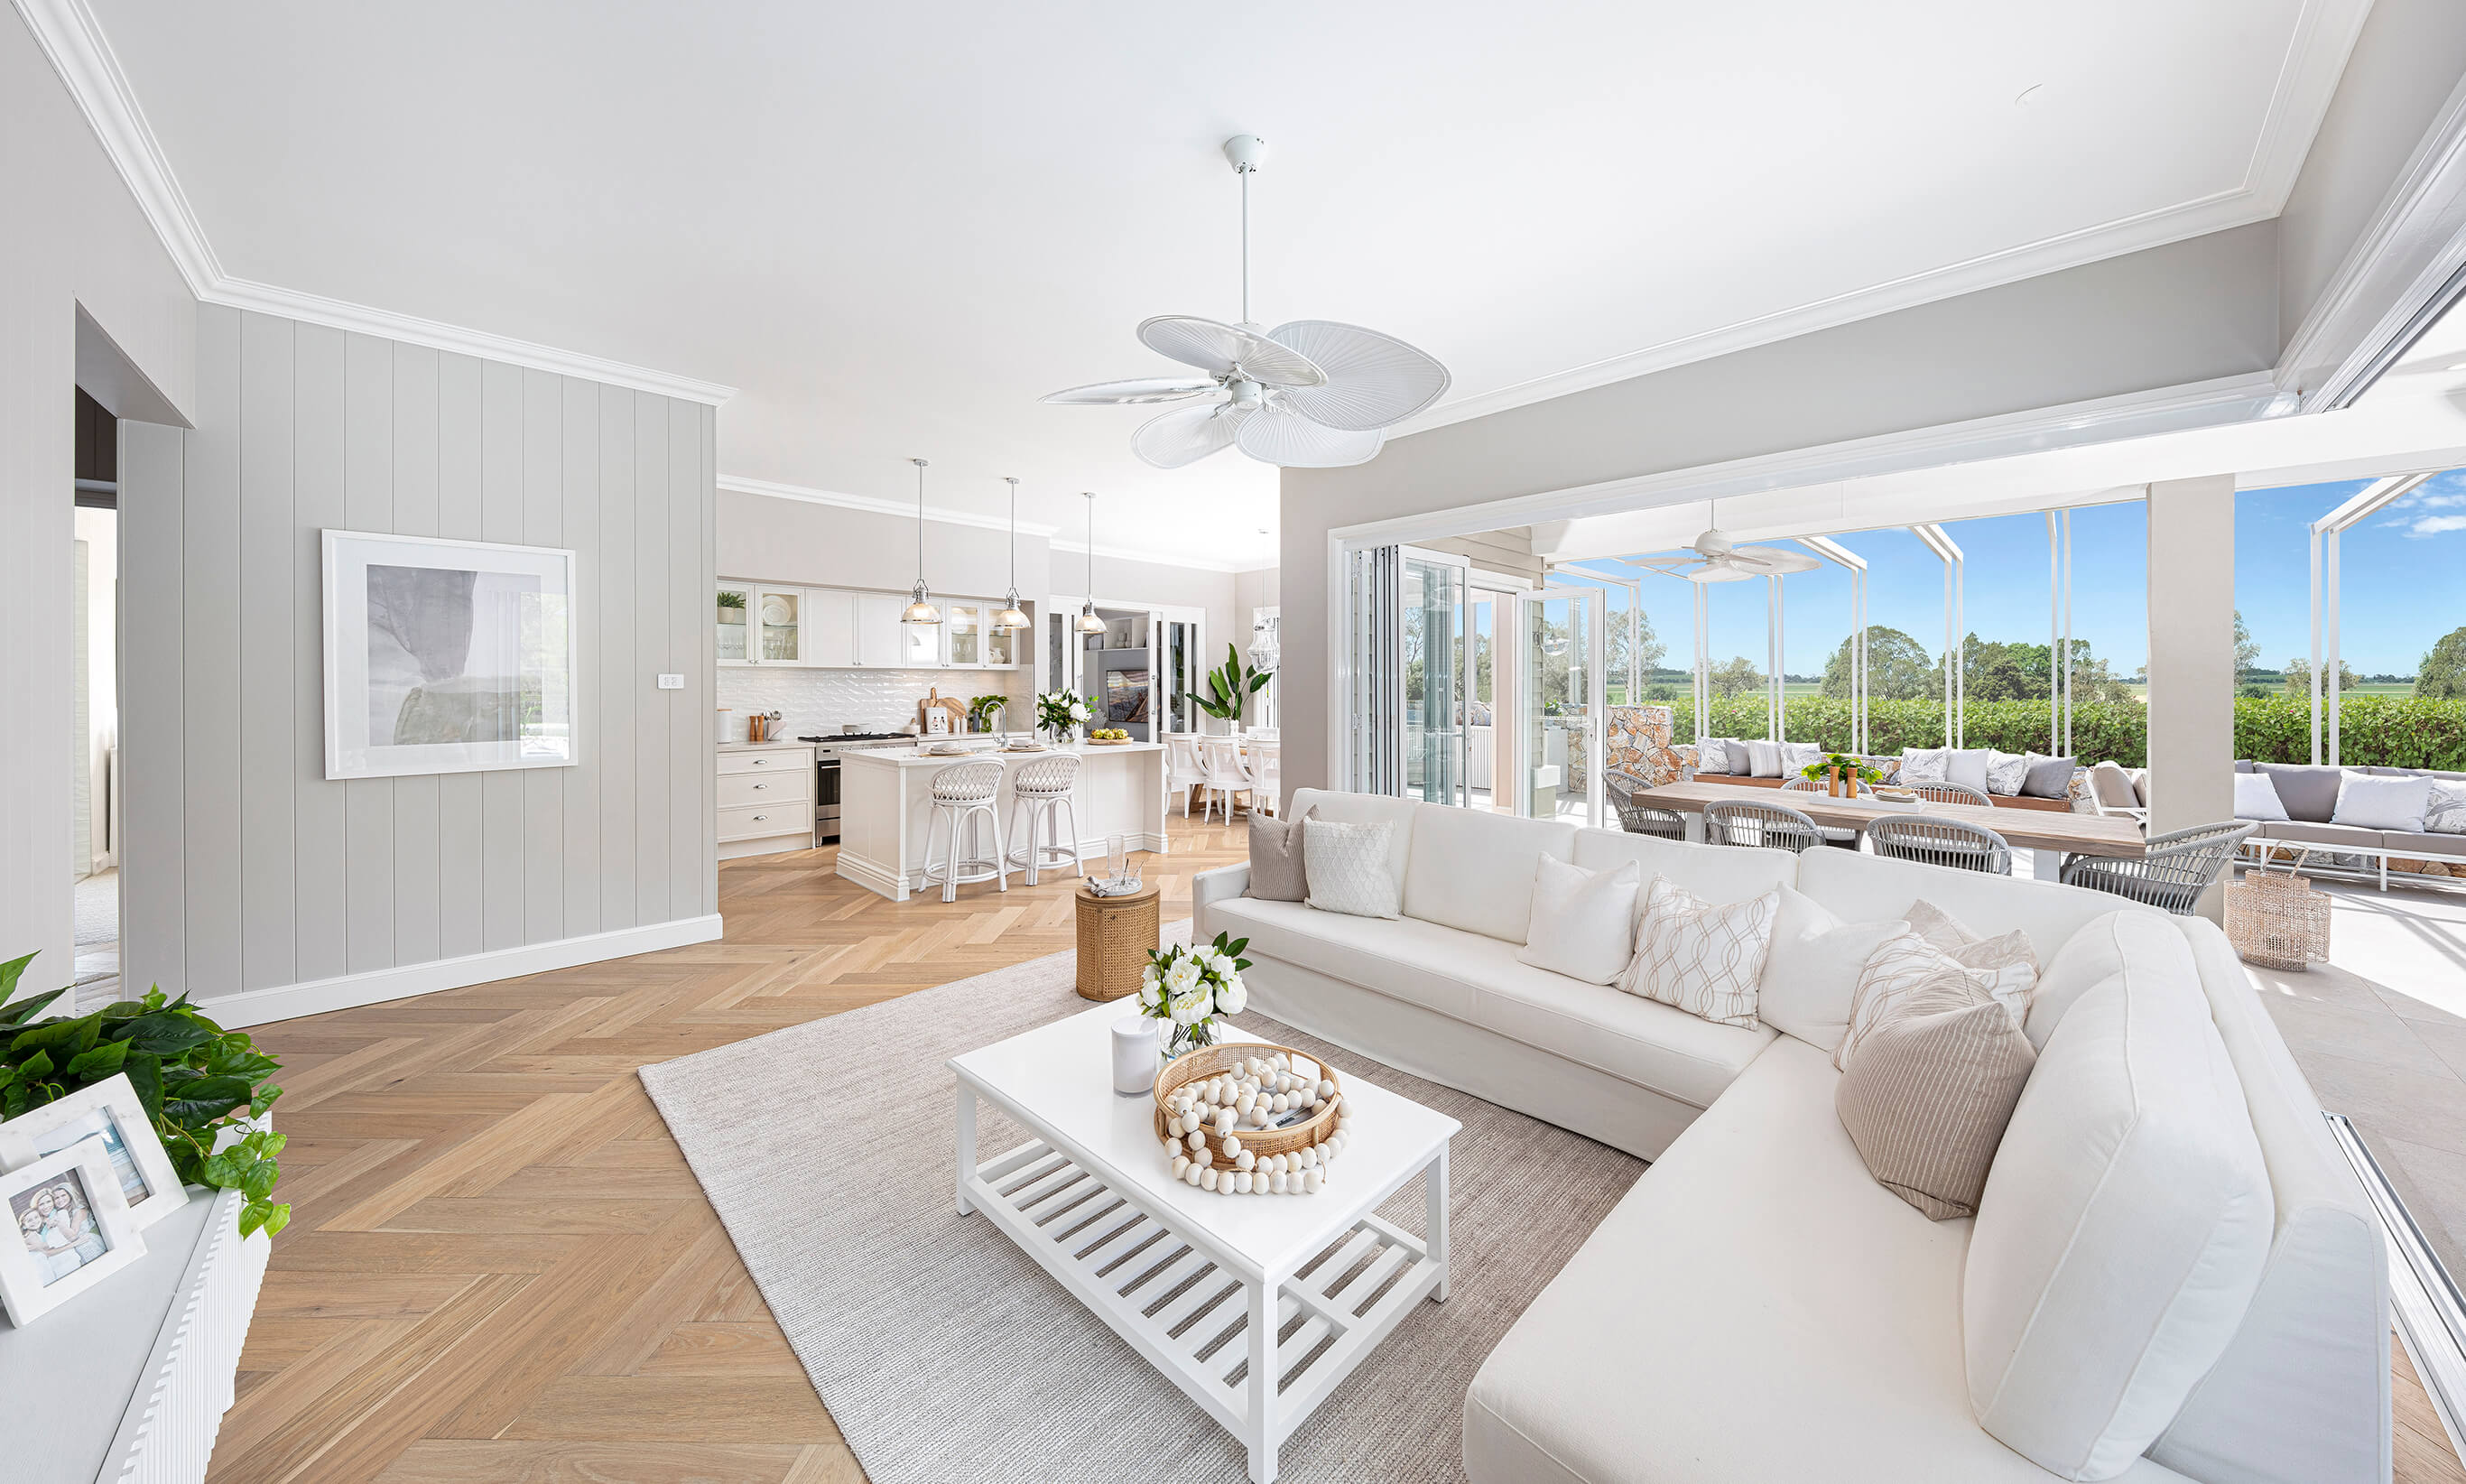 Beautiful Coastal styled living room, at Moonee Beach, featuring a Tahitian fan, plush white modular lounge suite, with open stacker glass doors and light timber flooring, built by McDonald Jones 